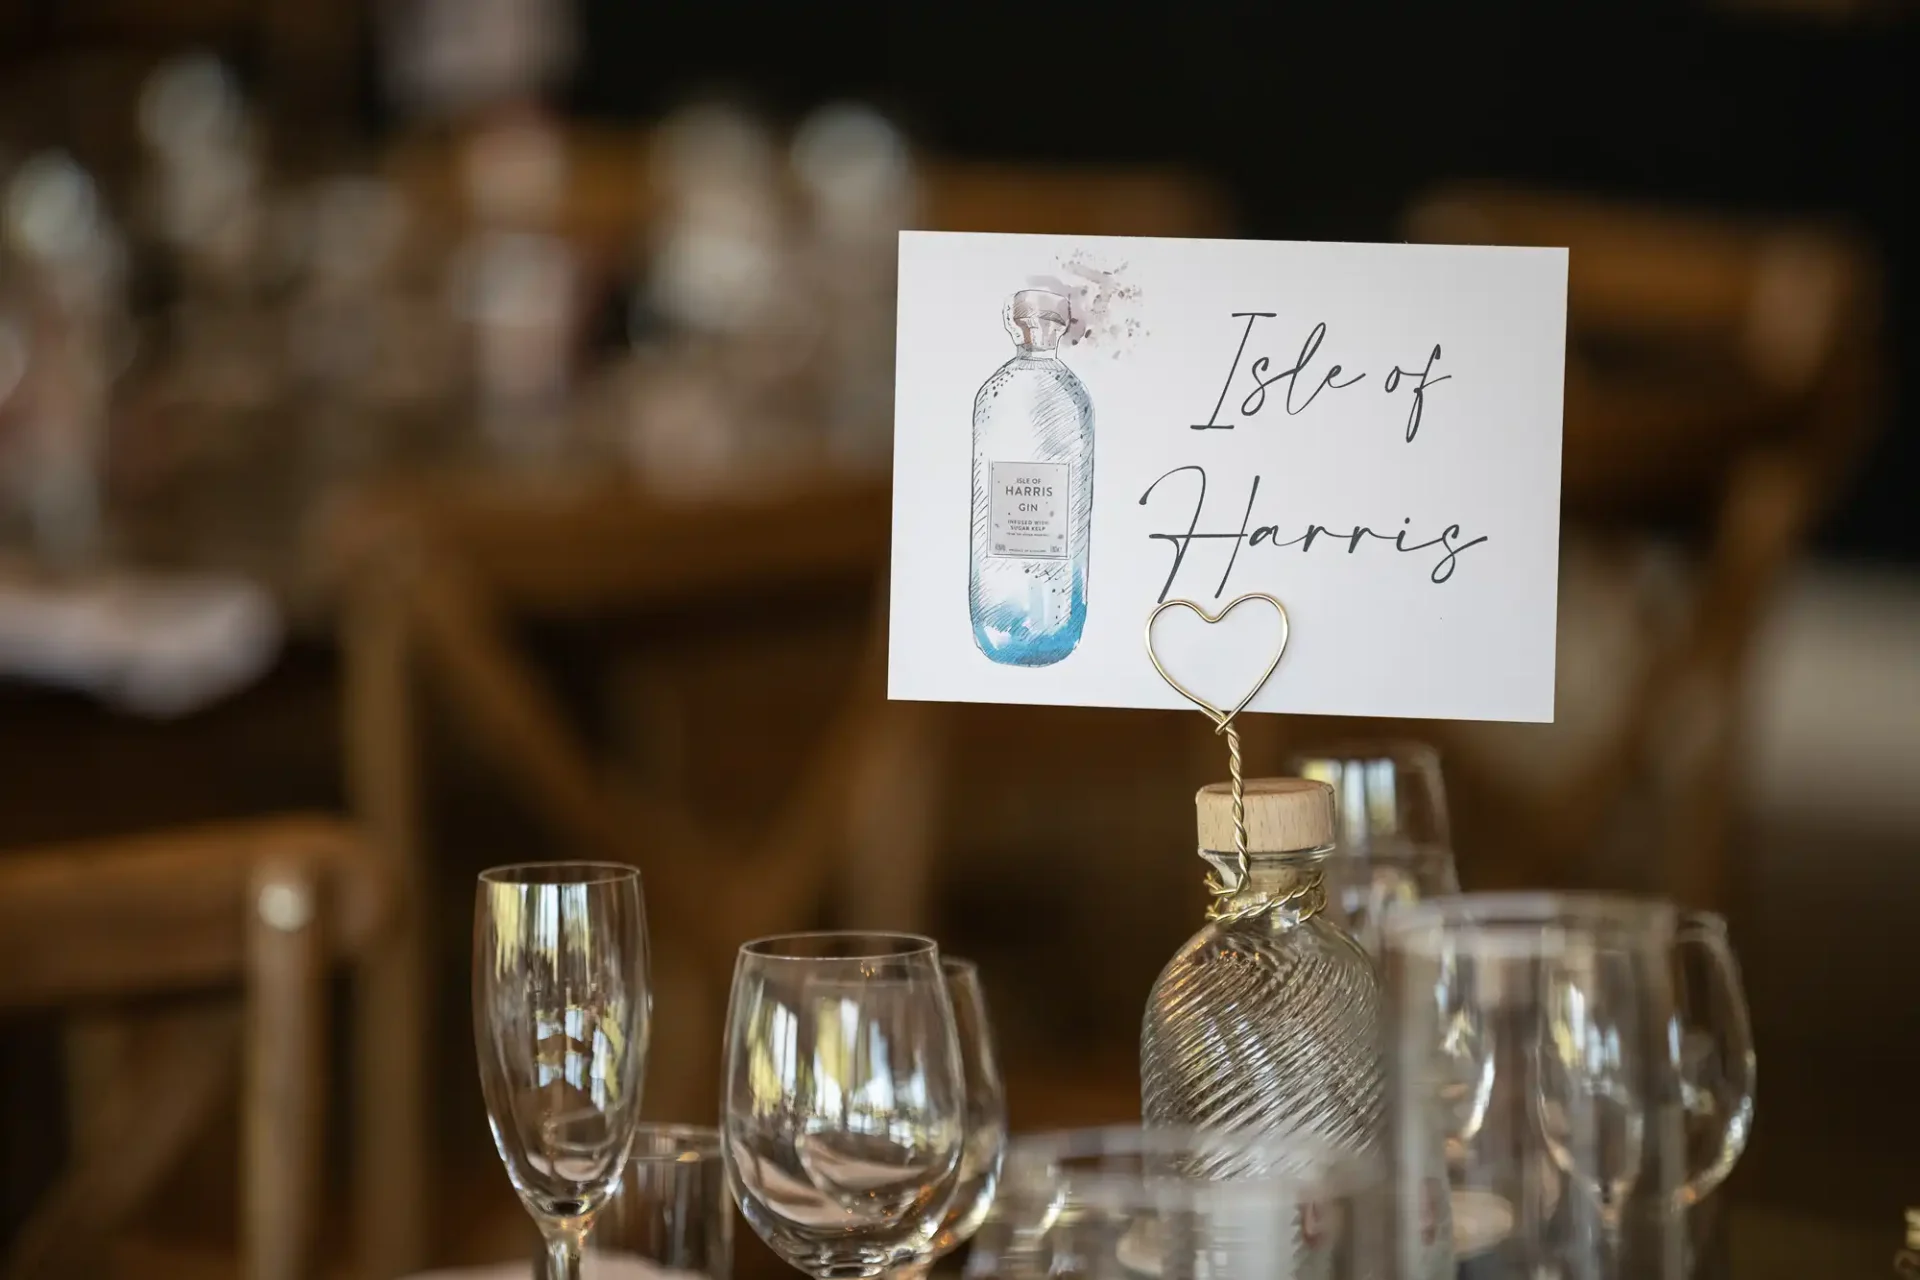 A table setting at an event with a name card reading "isle of harris" propped on a heart-shaped holder, flanked by wine glasses and blurred background.